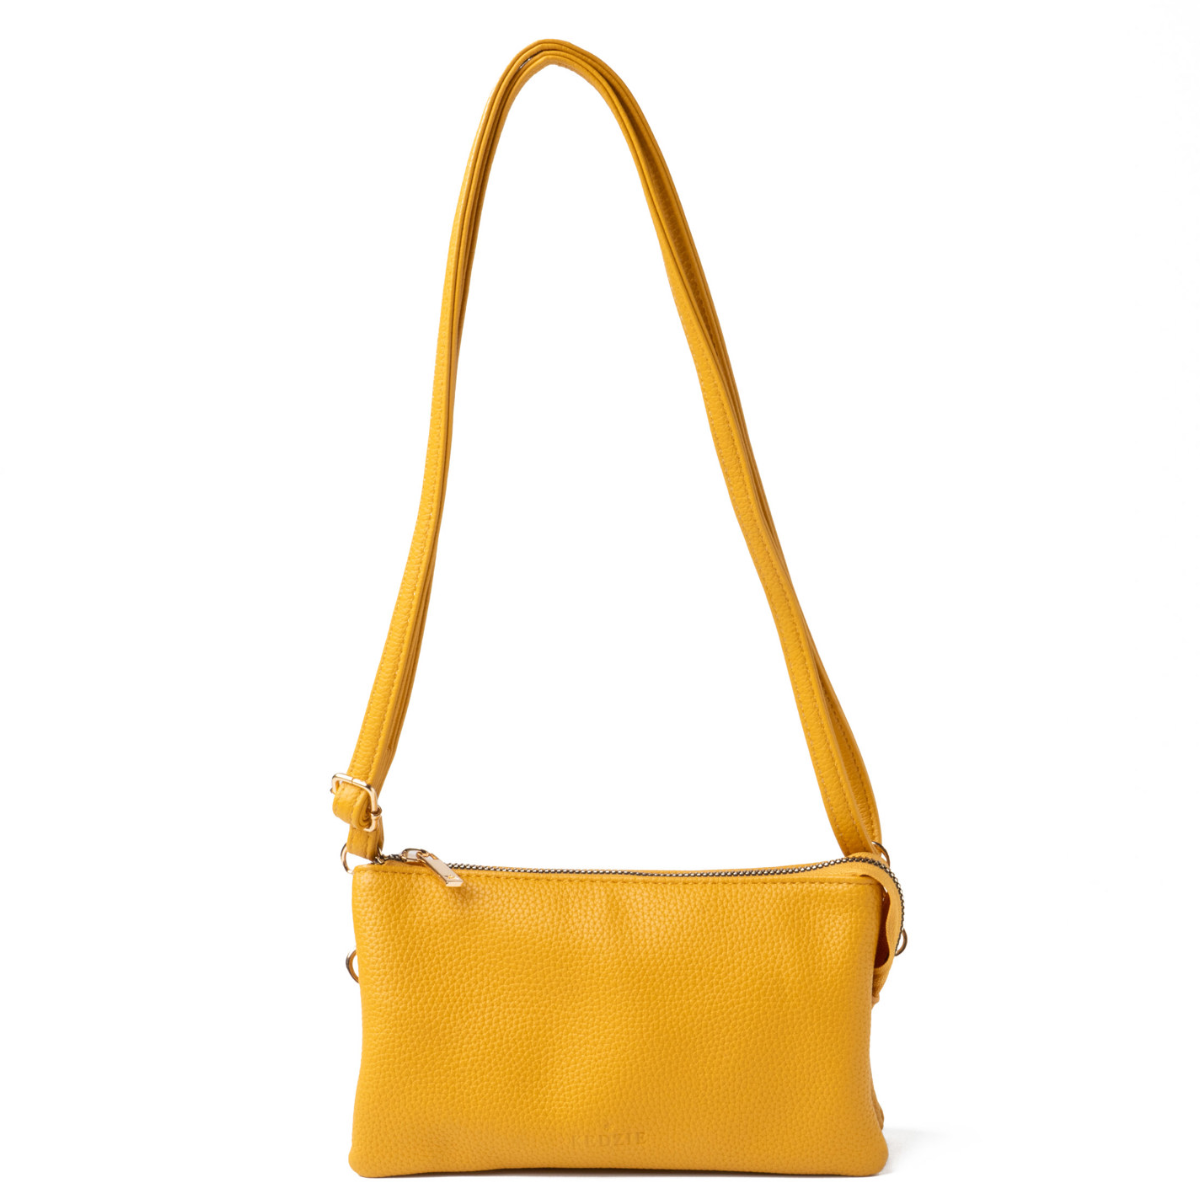 A yellow Convertible Crossbody Wallet featuring a crossbody strap made of vegan leather, with card slots, on a white background - DM MERCHANDISING INC.